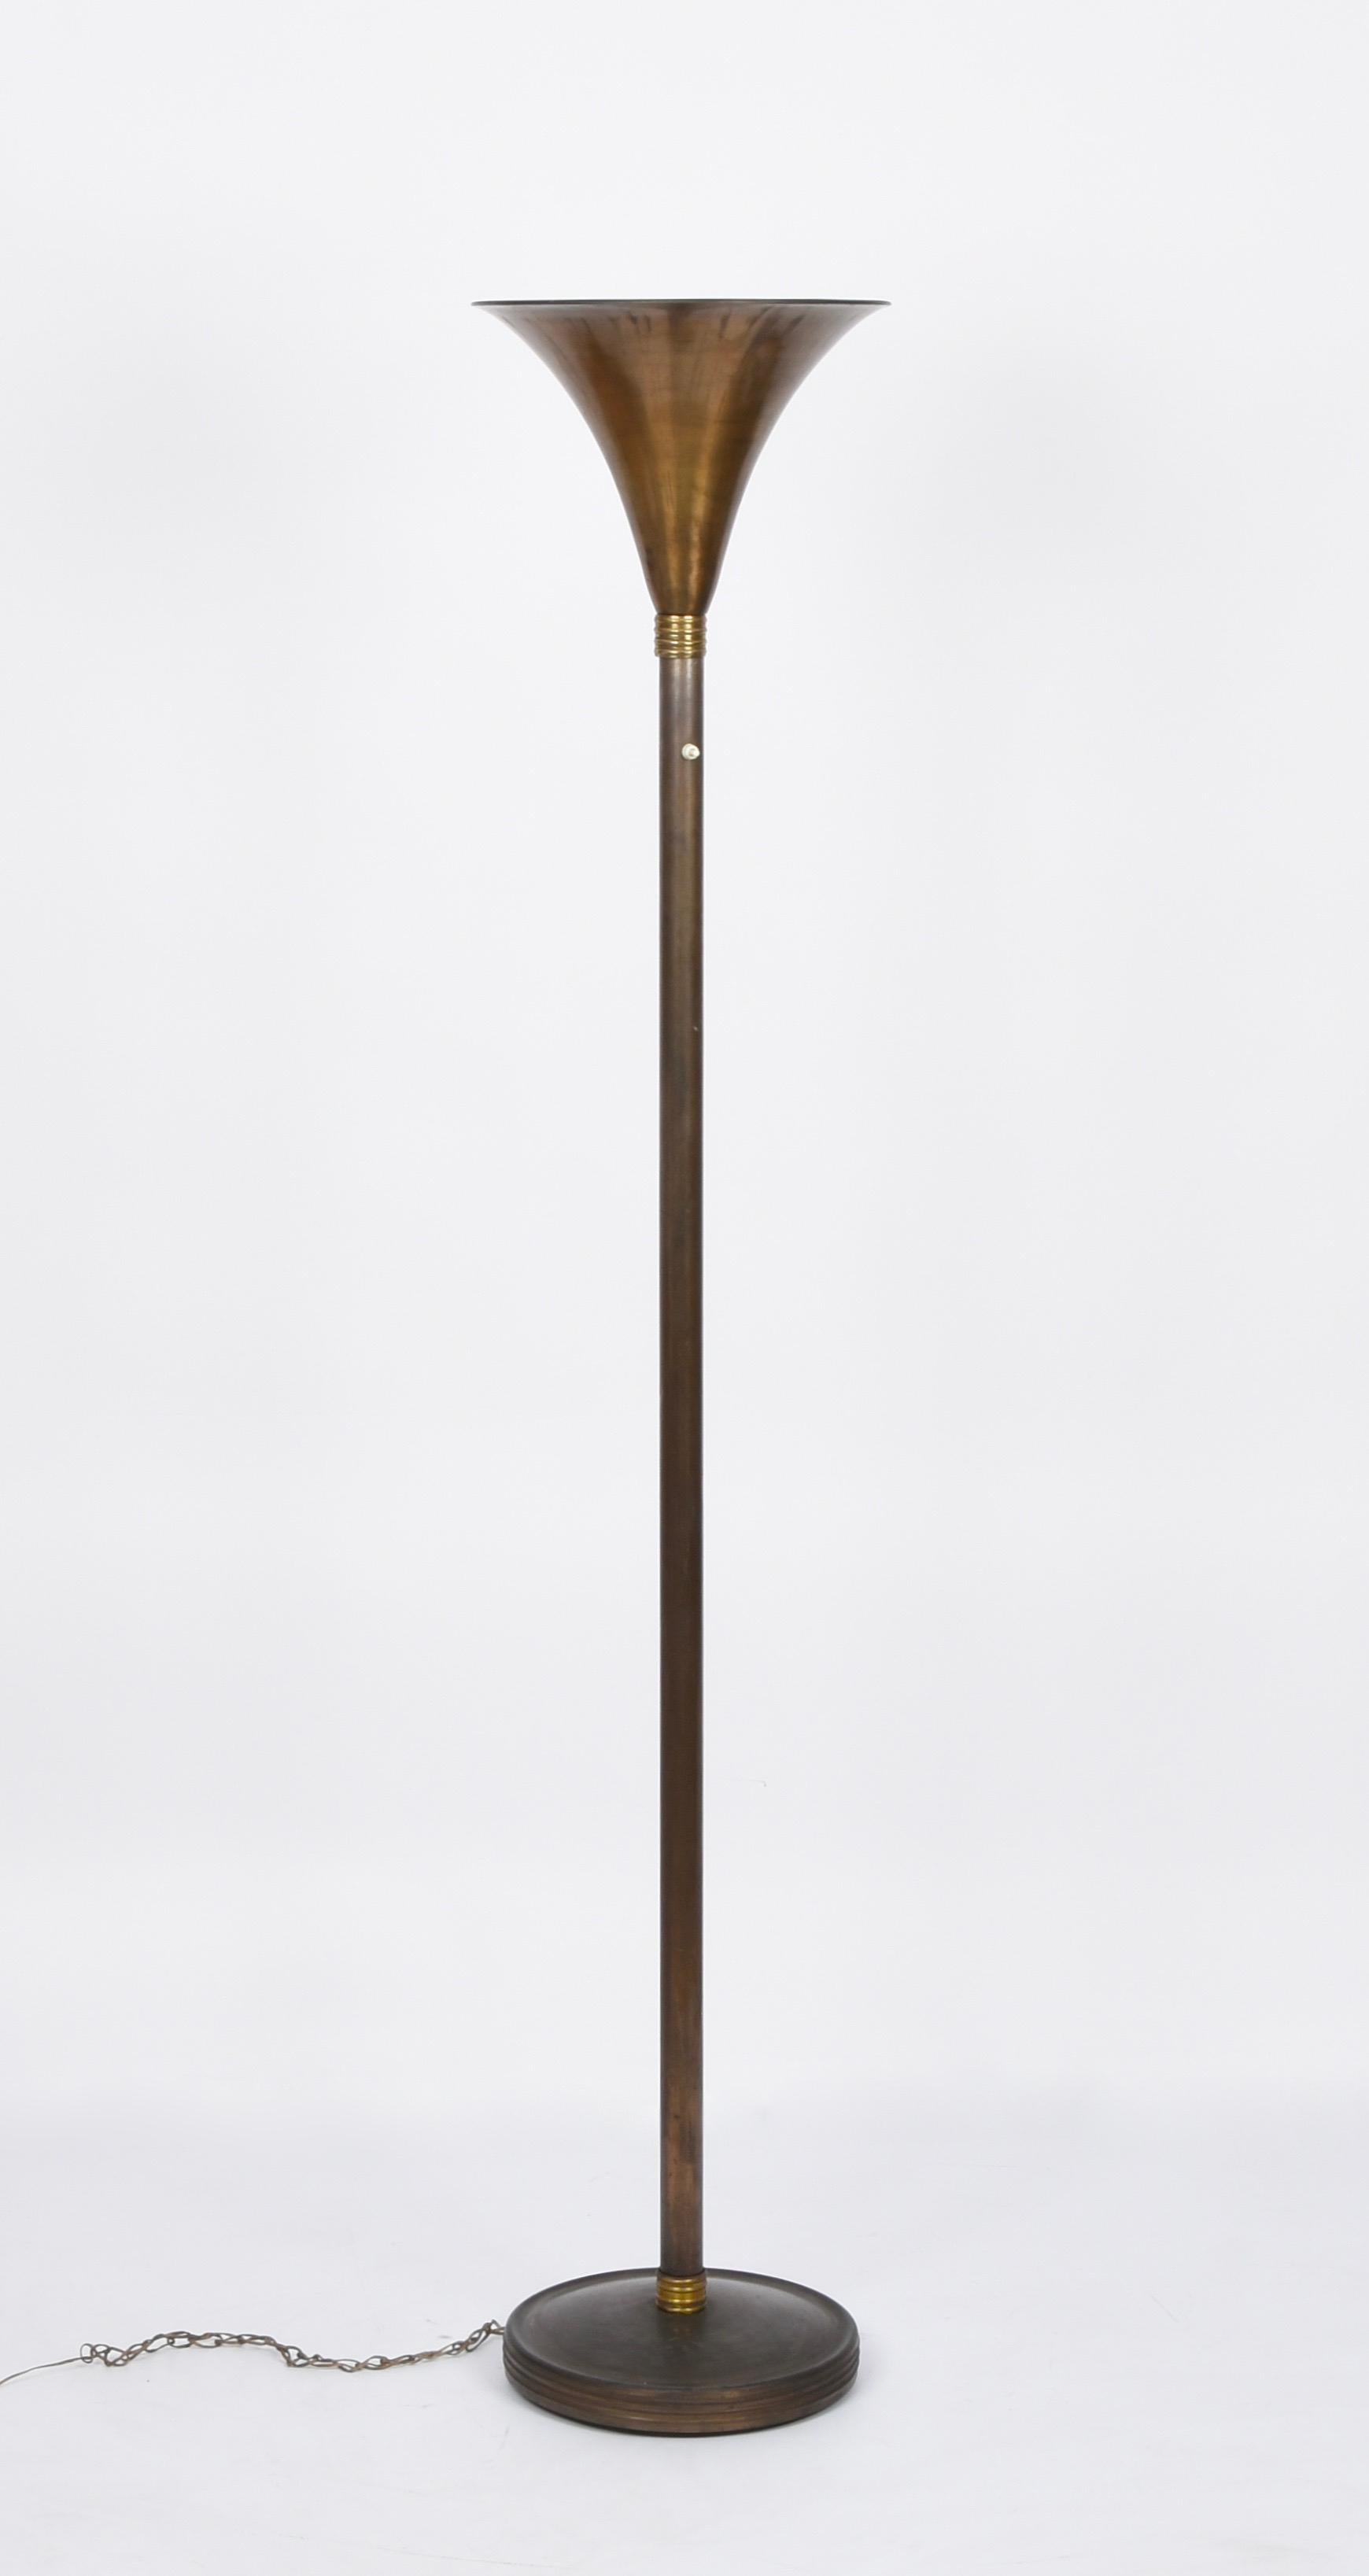 Mid-20th Century Art Deco Bronzed Metal and Brass Italian Floor Lamp after Pietro Chiesa, 1940s For Sale